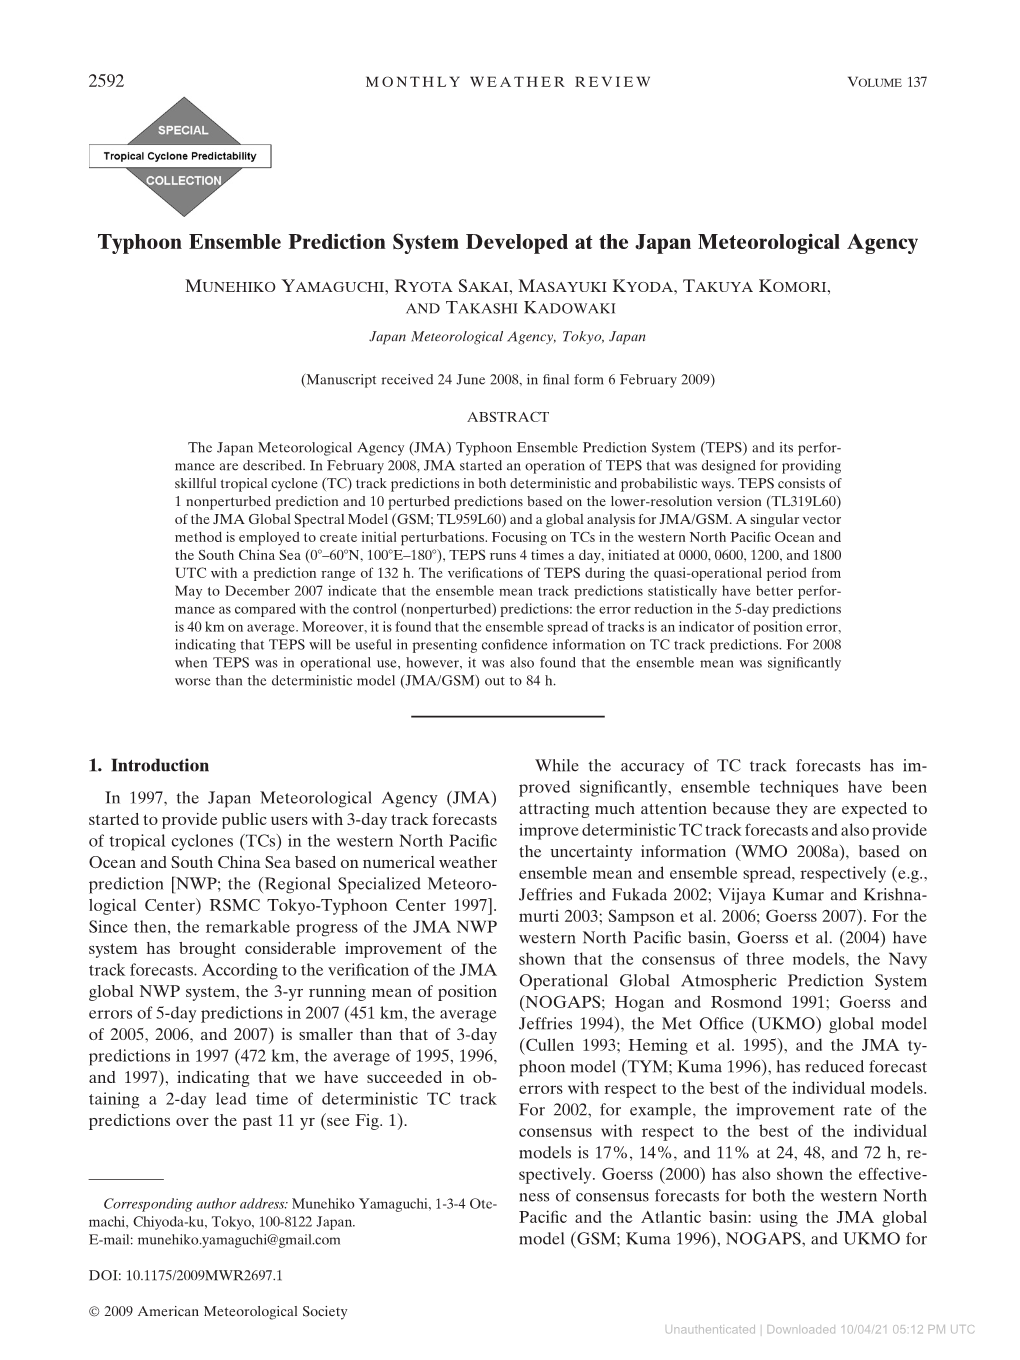 Typhoon Ensemble Prediction System Developed at the Japan Meteorological Agency